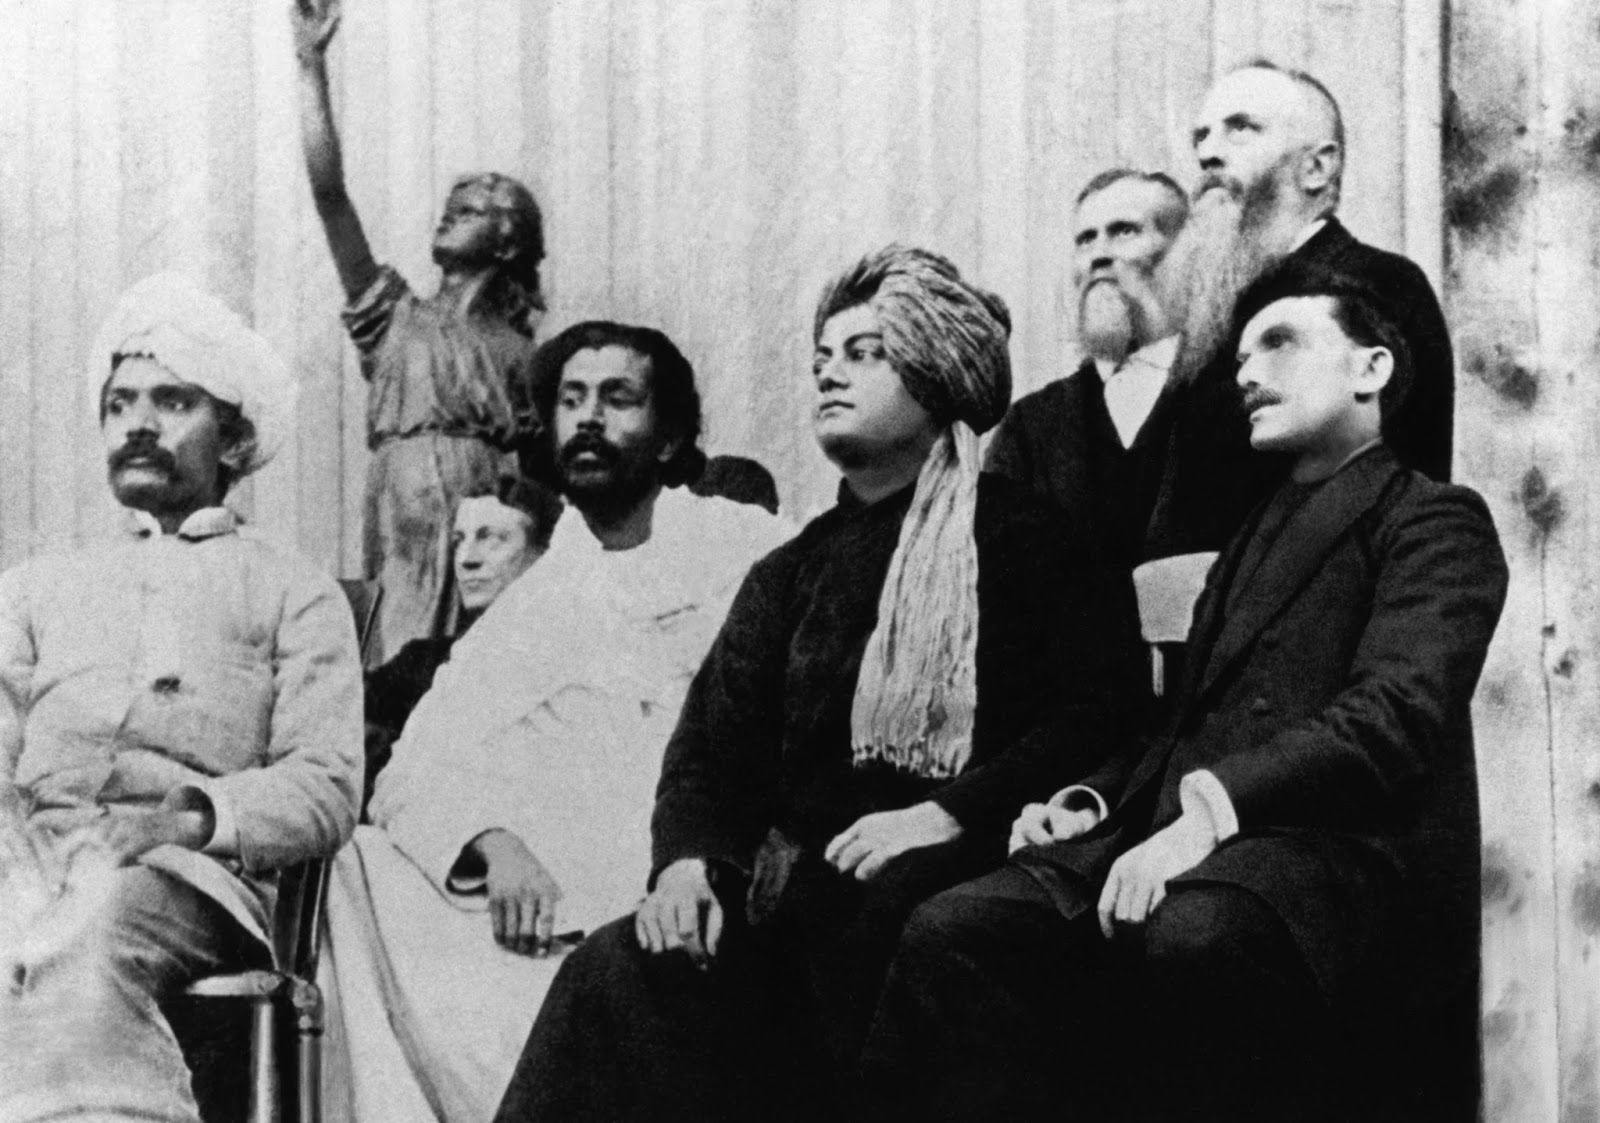 At the World Parliament of Religions, L-R: Virchand Gandhi, Hewivitarne Dharmapala, Swami Vivekananda, and (possibly) G. Bonet Maury